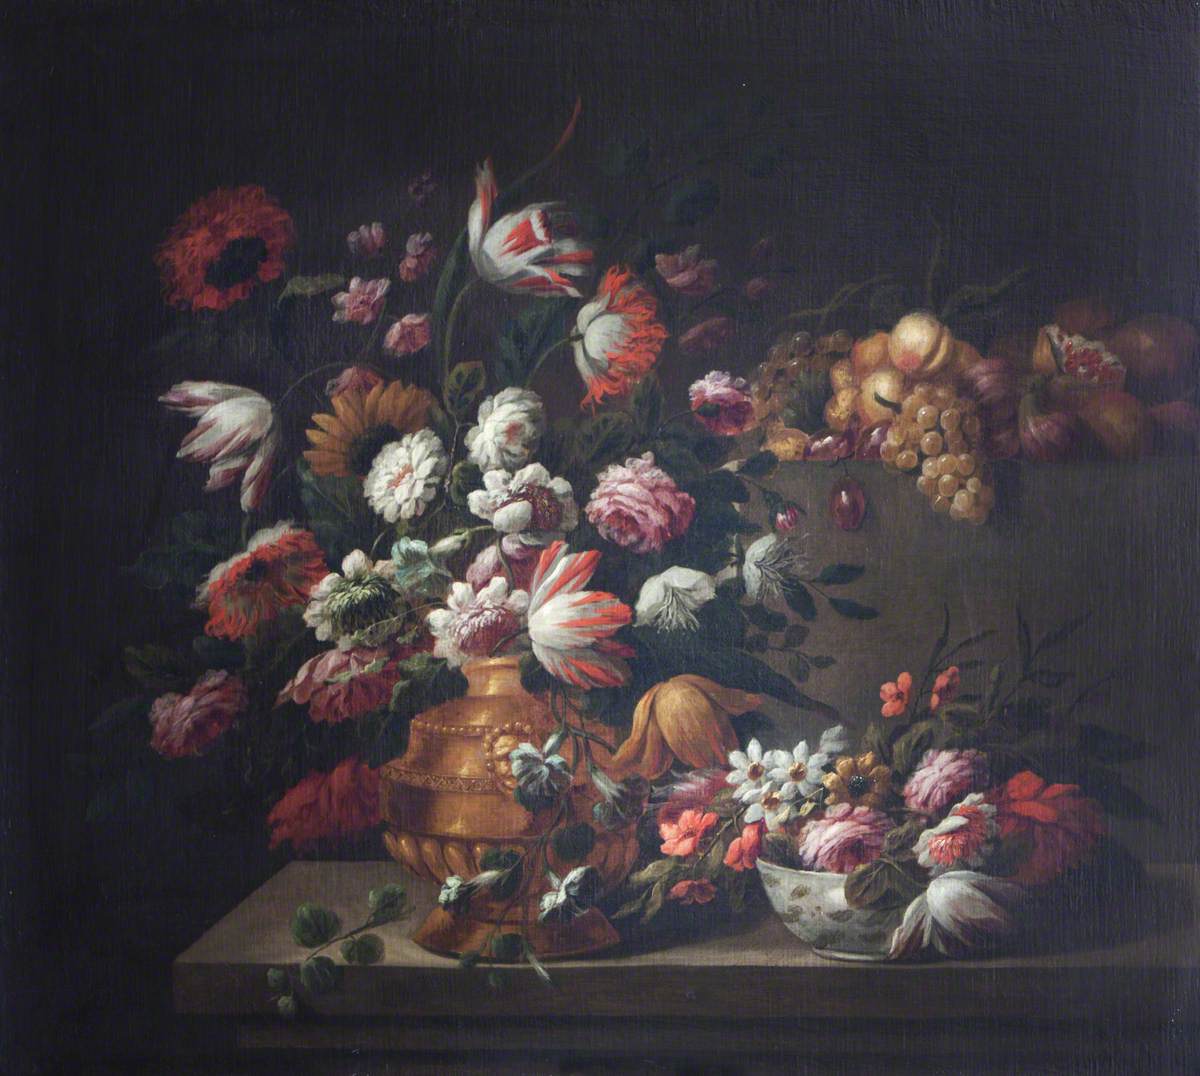 Tulips, Roses and Other Flowers in a Golden Vase and in a Porcelain Bowl, and Fruit on a Pedestal